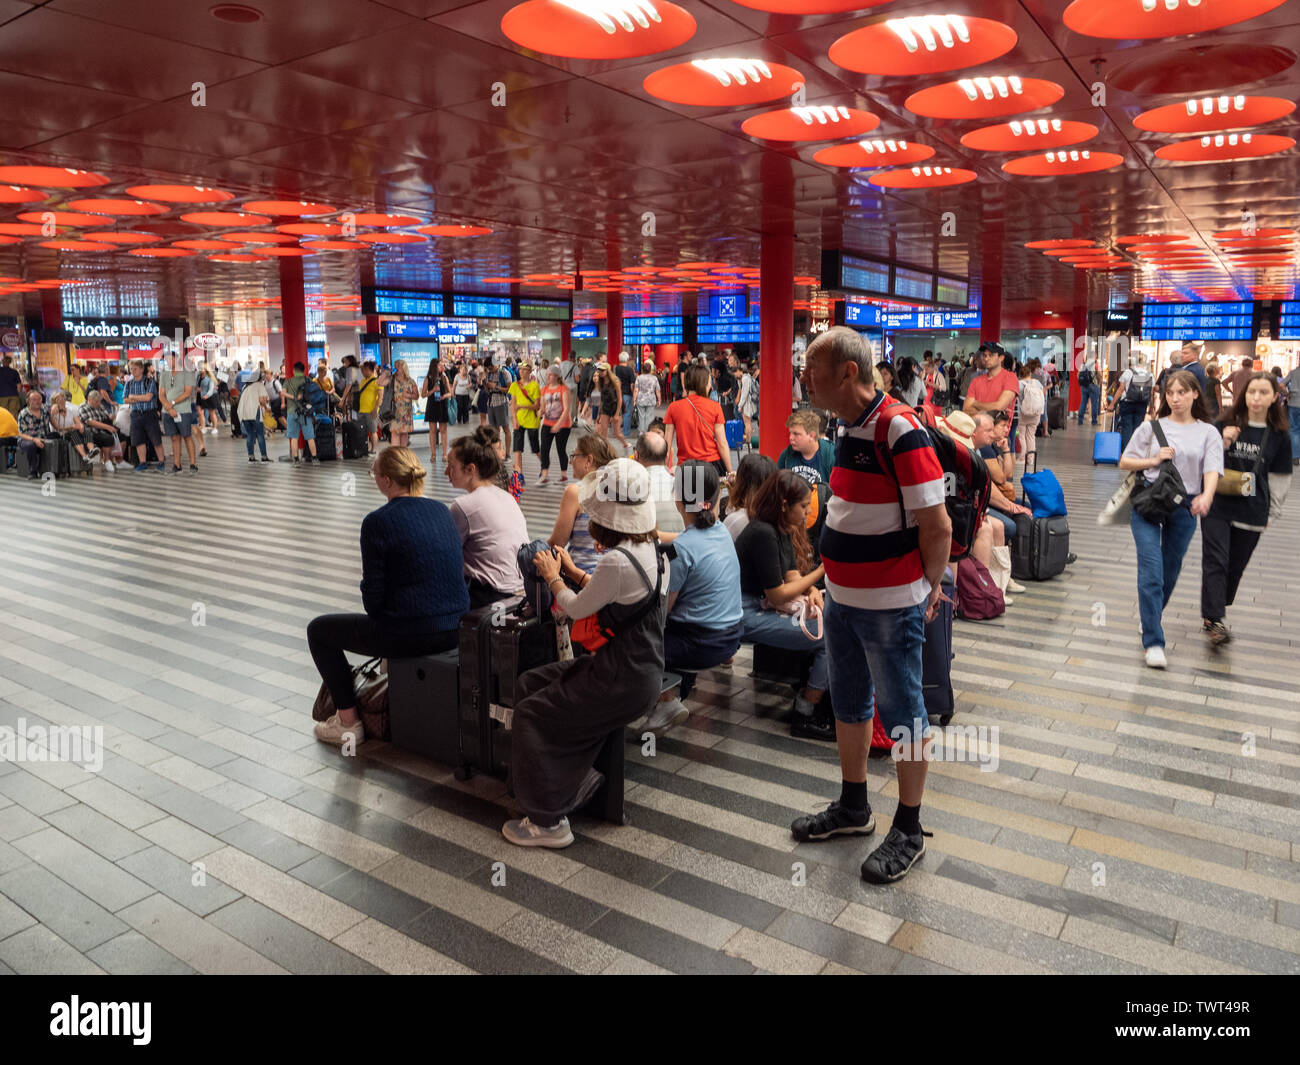 Prague, Czech Republic - June 10 2019: Prague Main Station Interior Crowded with Travellers. A Bustling Railroad Terminal Building. Stock Photo